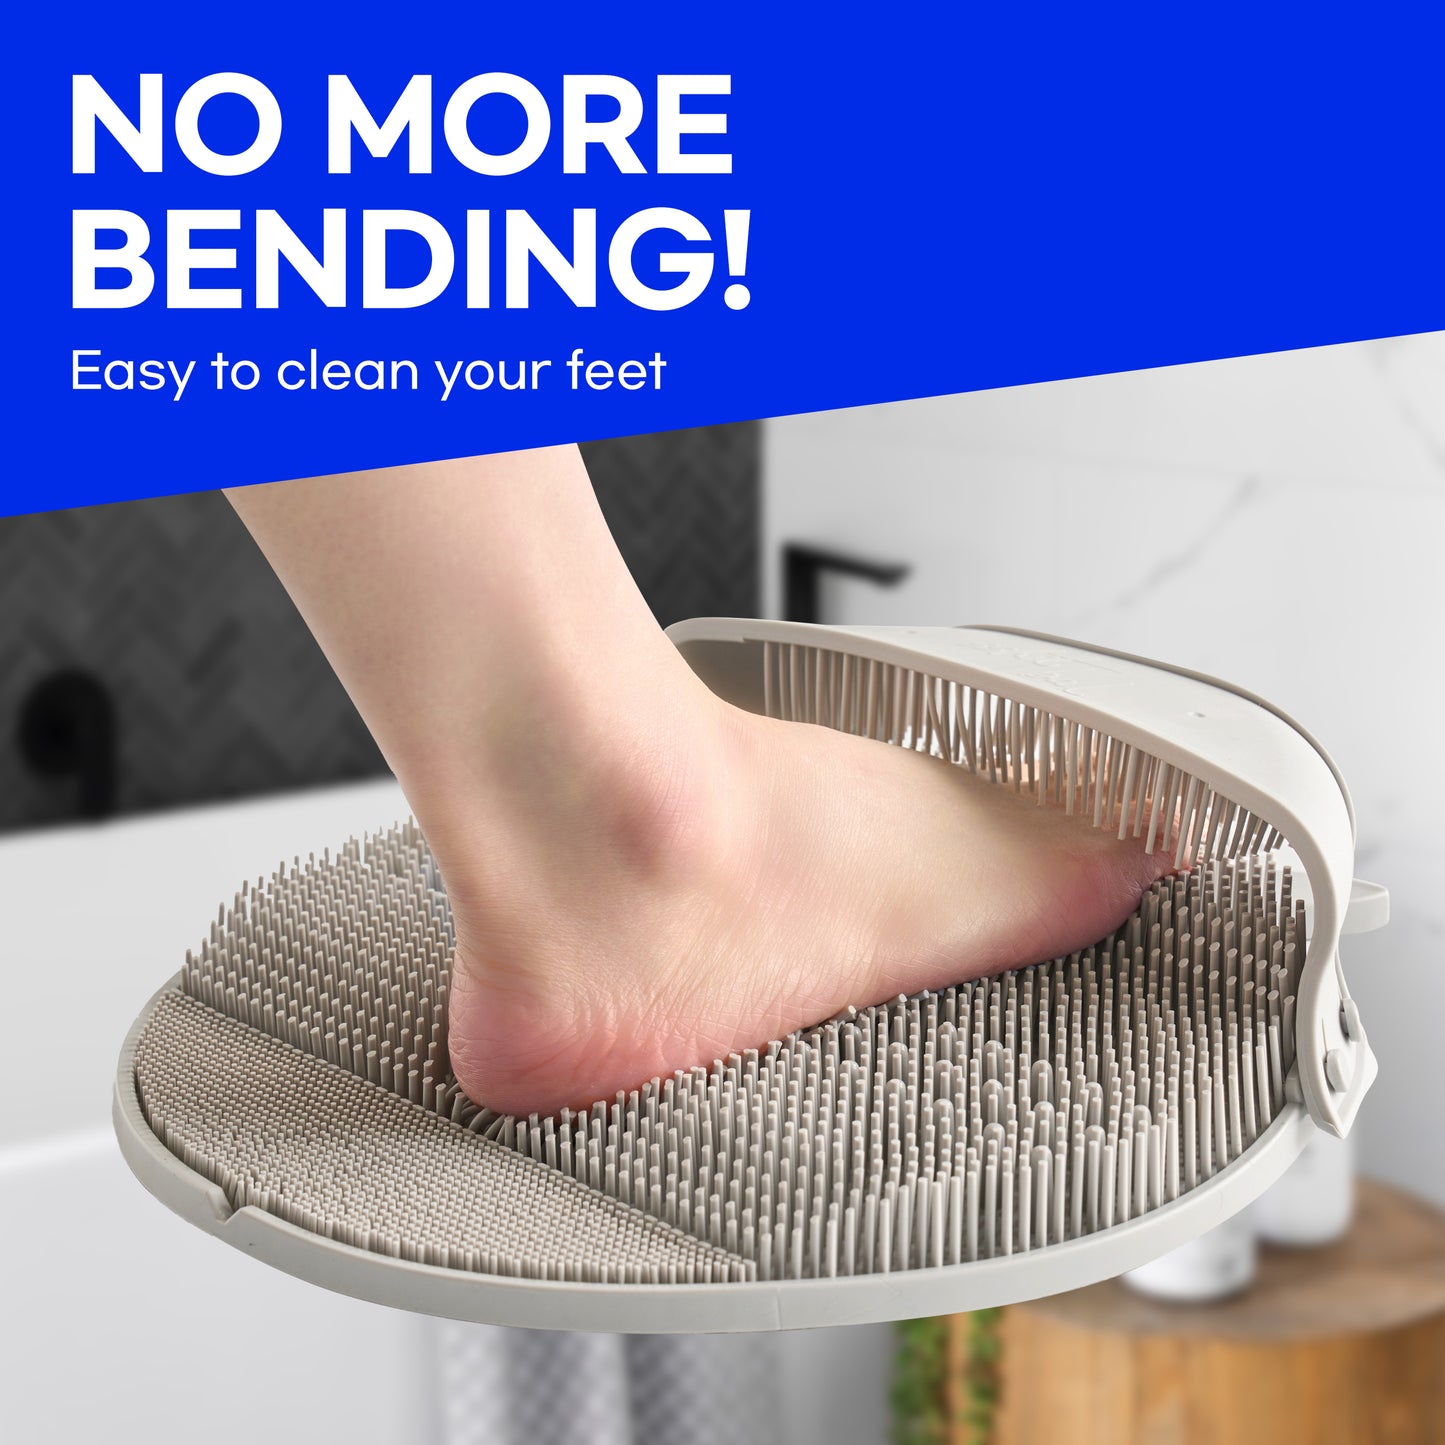 BOSS DADY Larger Foot Scrubber - Foot Cleaner&Massager with Non-Slip Suction Cups for Use in The Shower